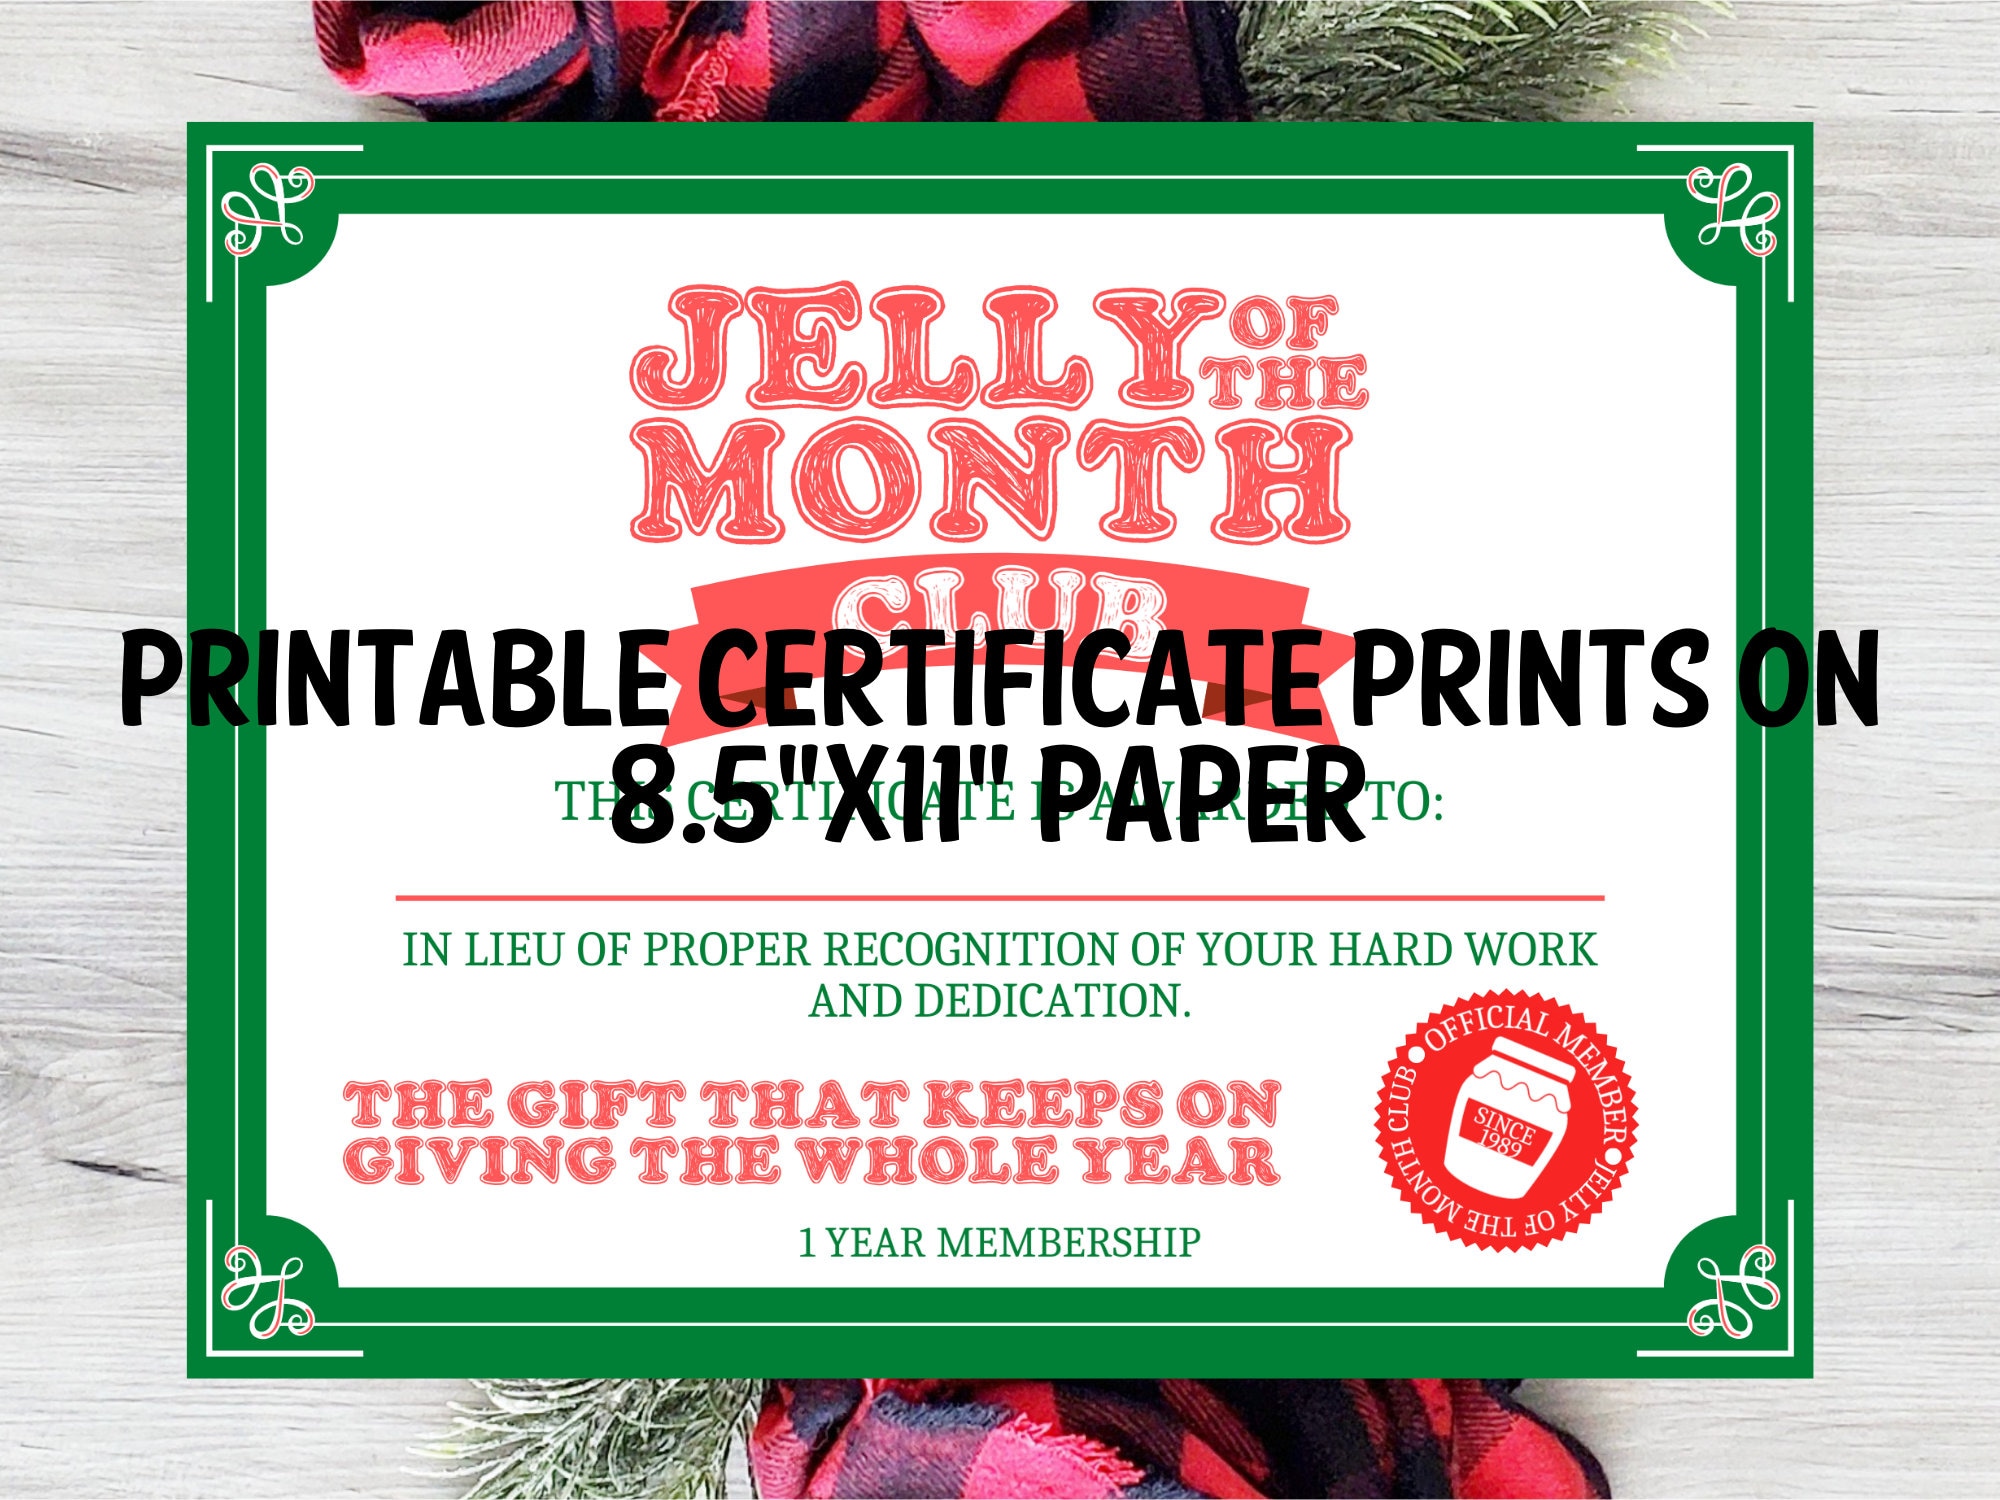 jelly-of-the-month-club-printable